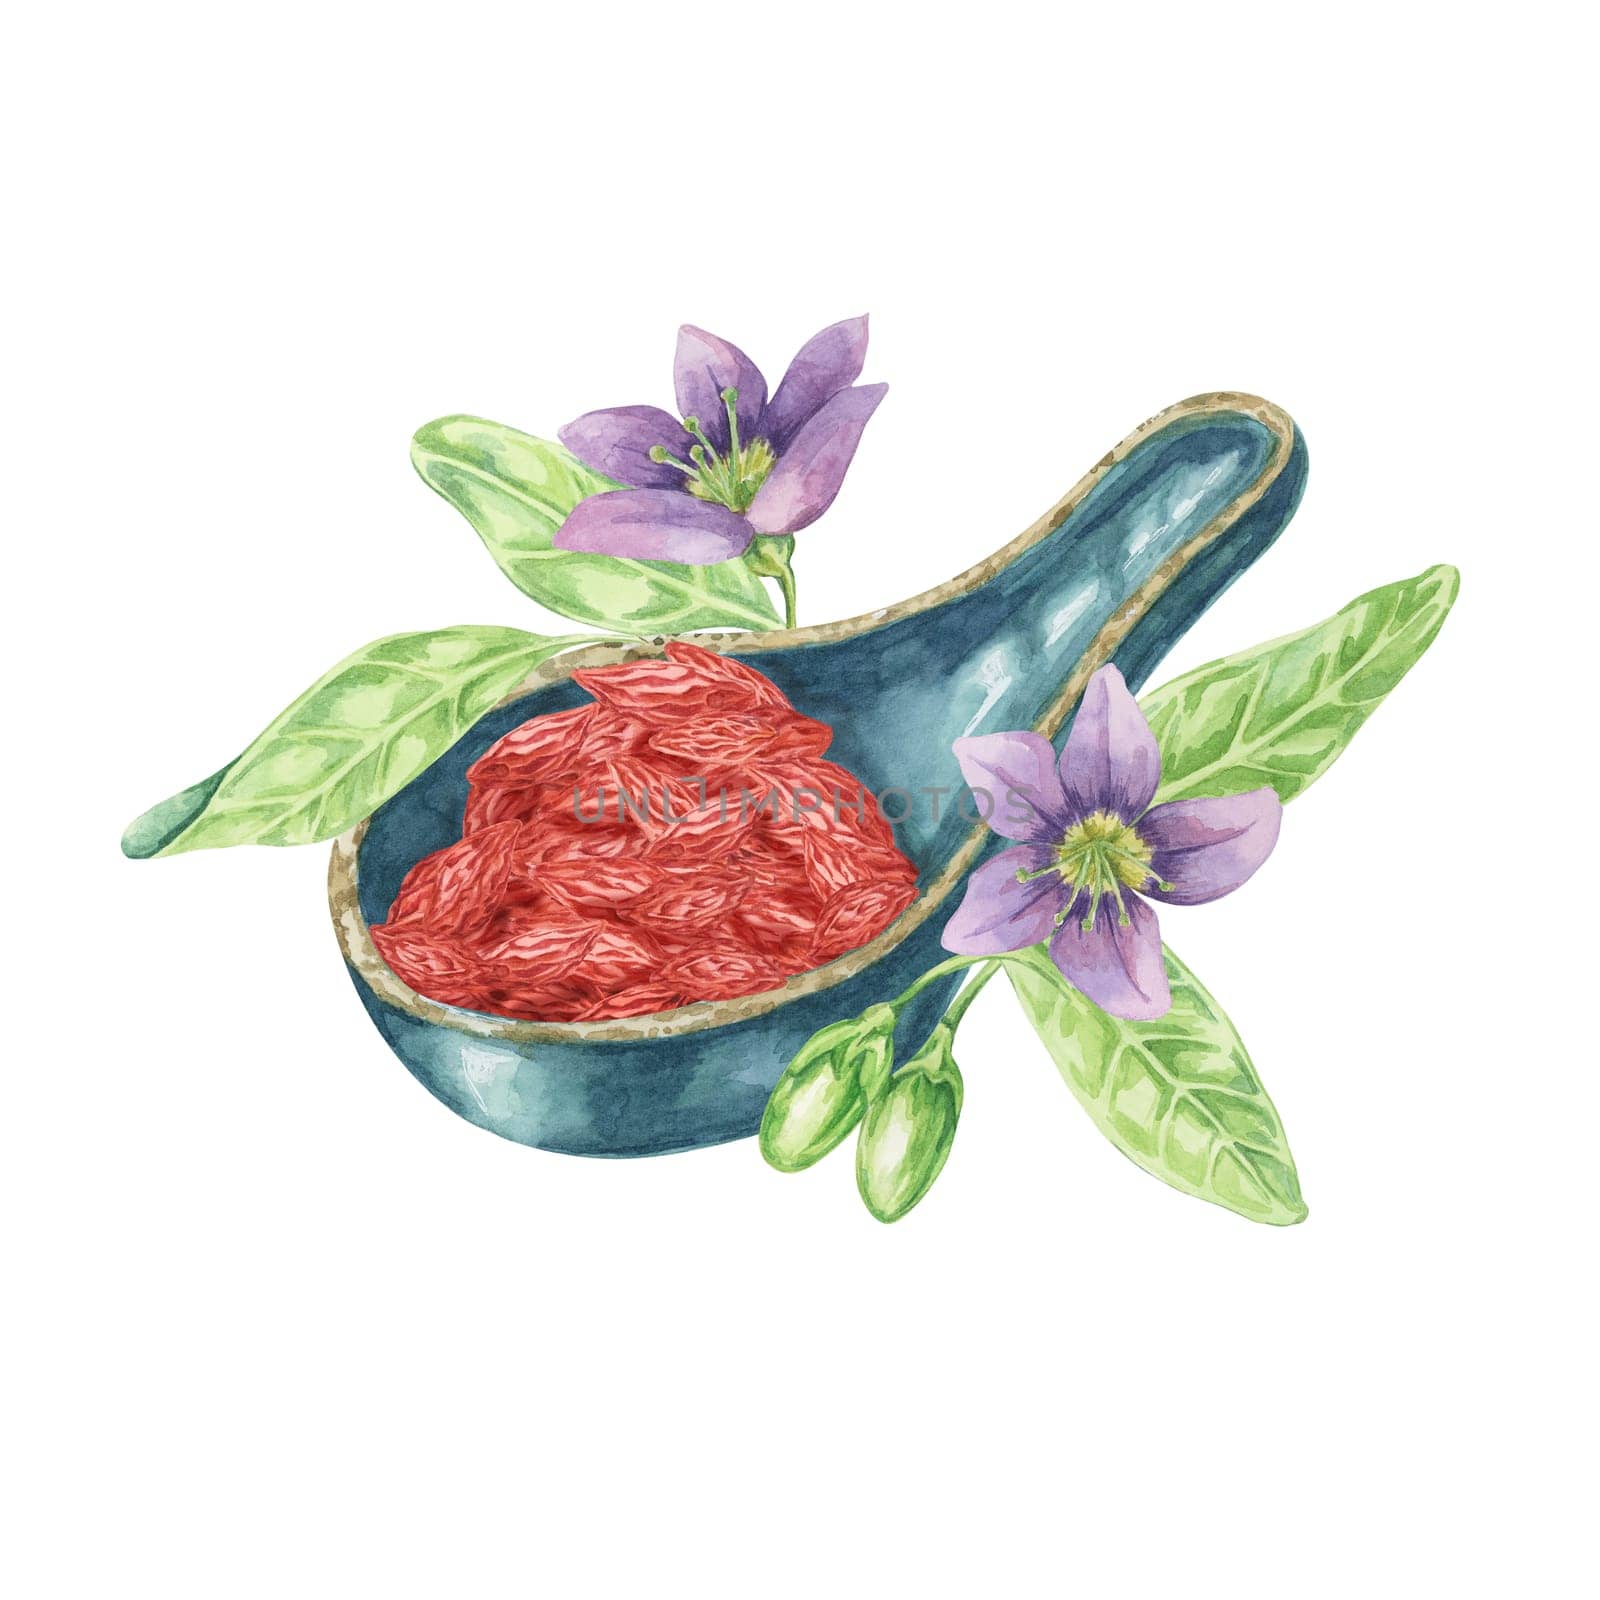 Ceramic asian spoon with dry and fresh goji berries. Hand-drawn watercolor clipart of red and green licium barbarum fruits. Design for printing, packaging, cards, food supplements isolated on white.